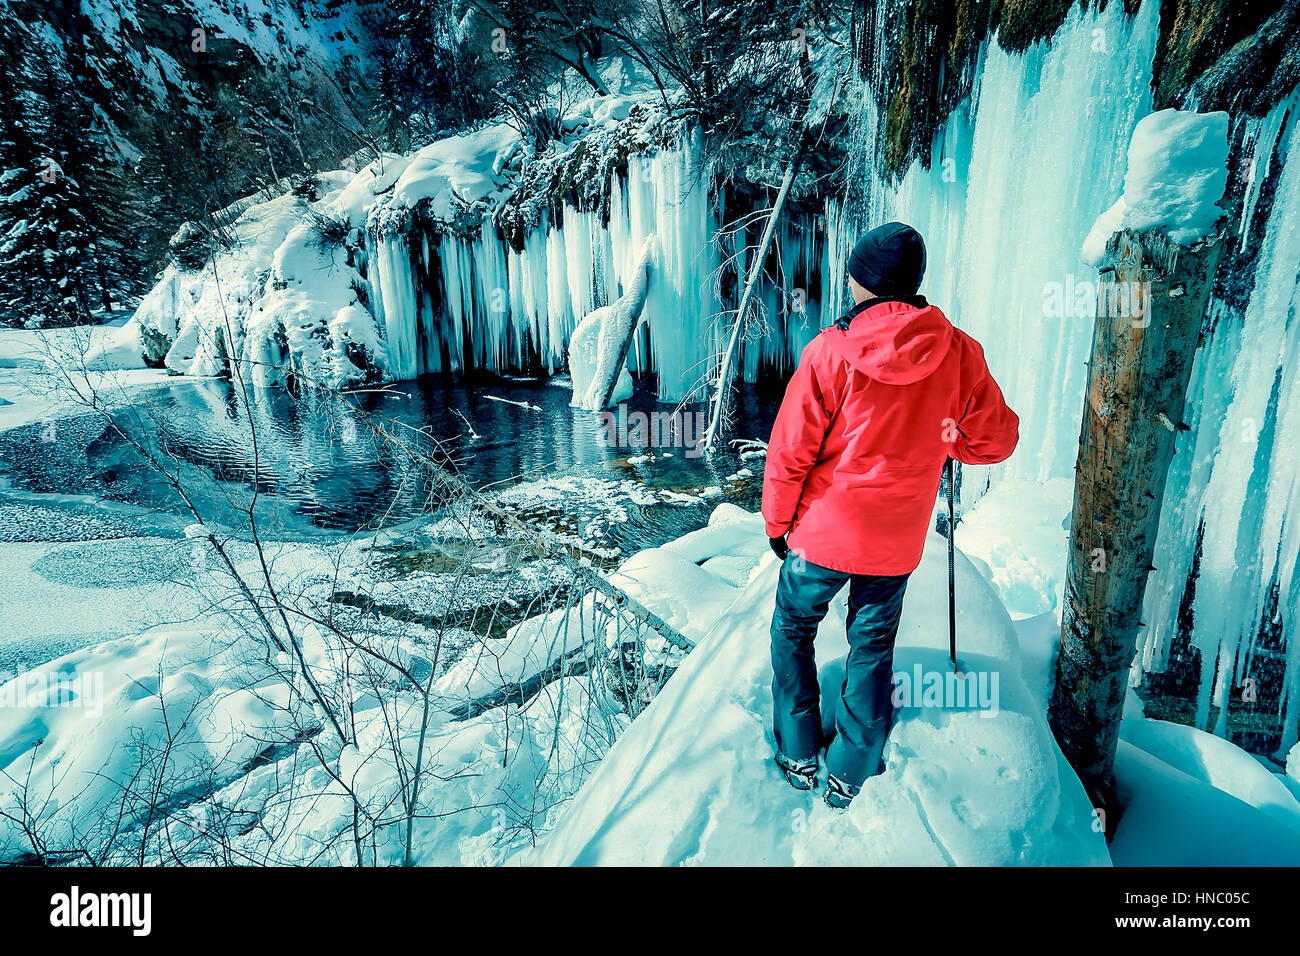 Man standing in front of frozen waterfall, Hanging lake, Colorado, United States Stock Photo